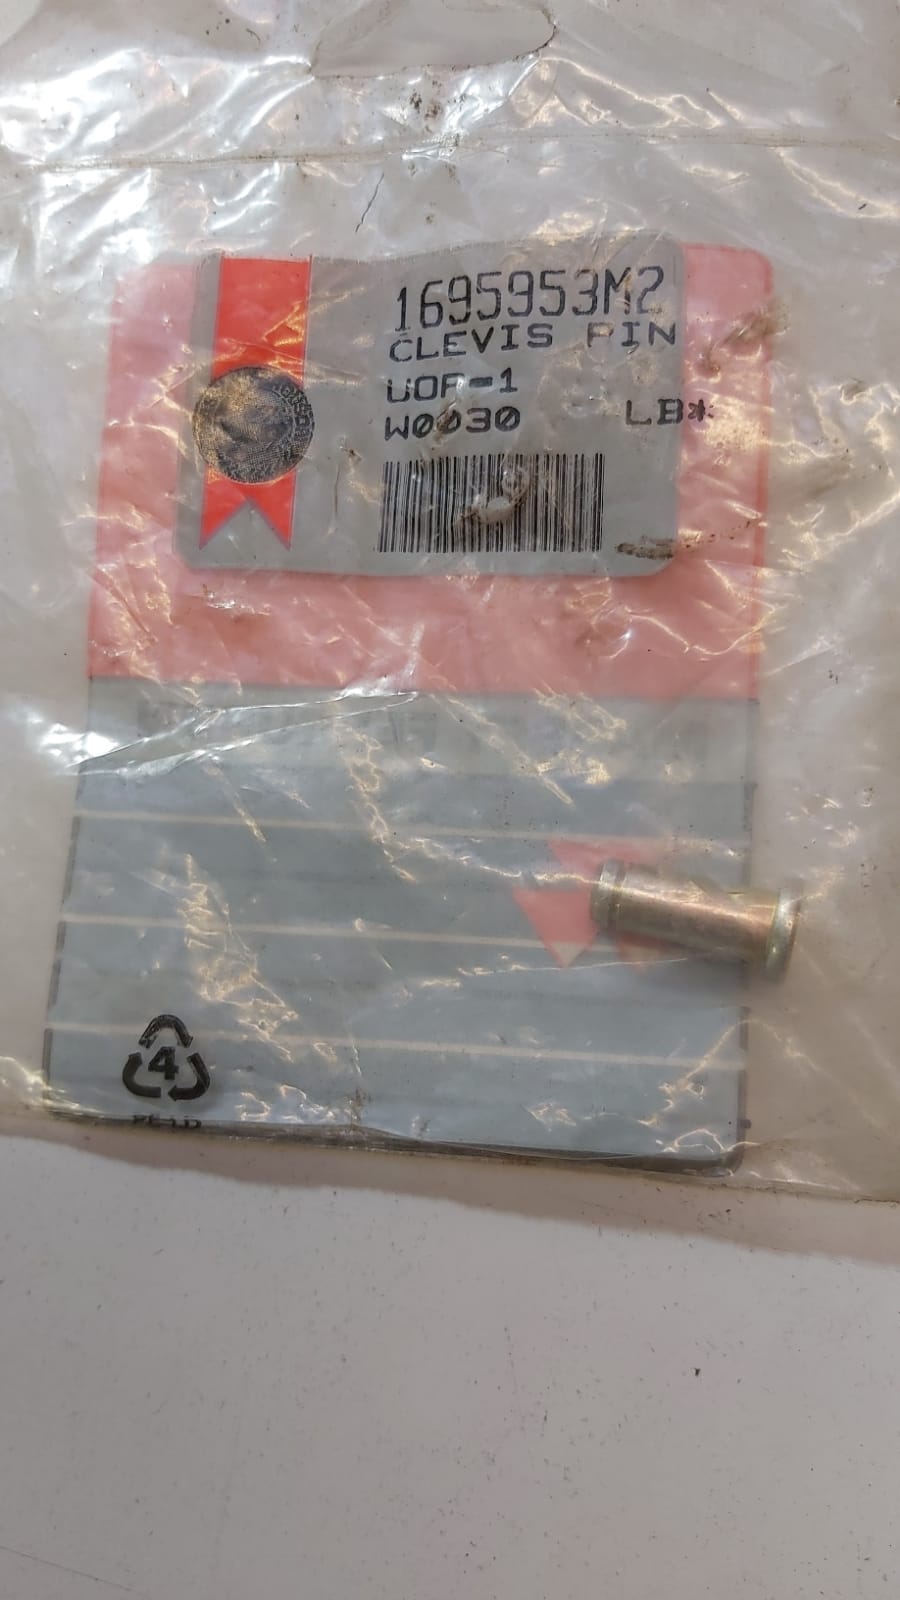 clevis-pin-1695953m2